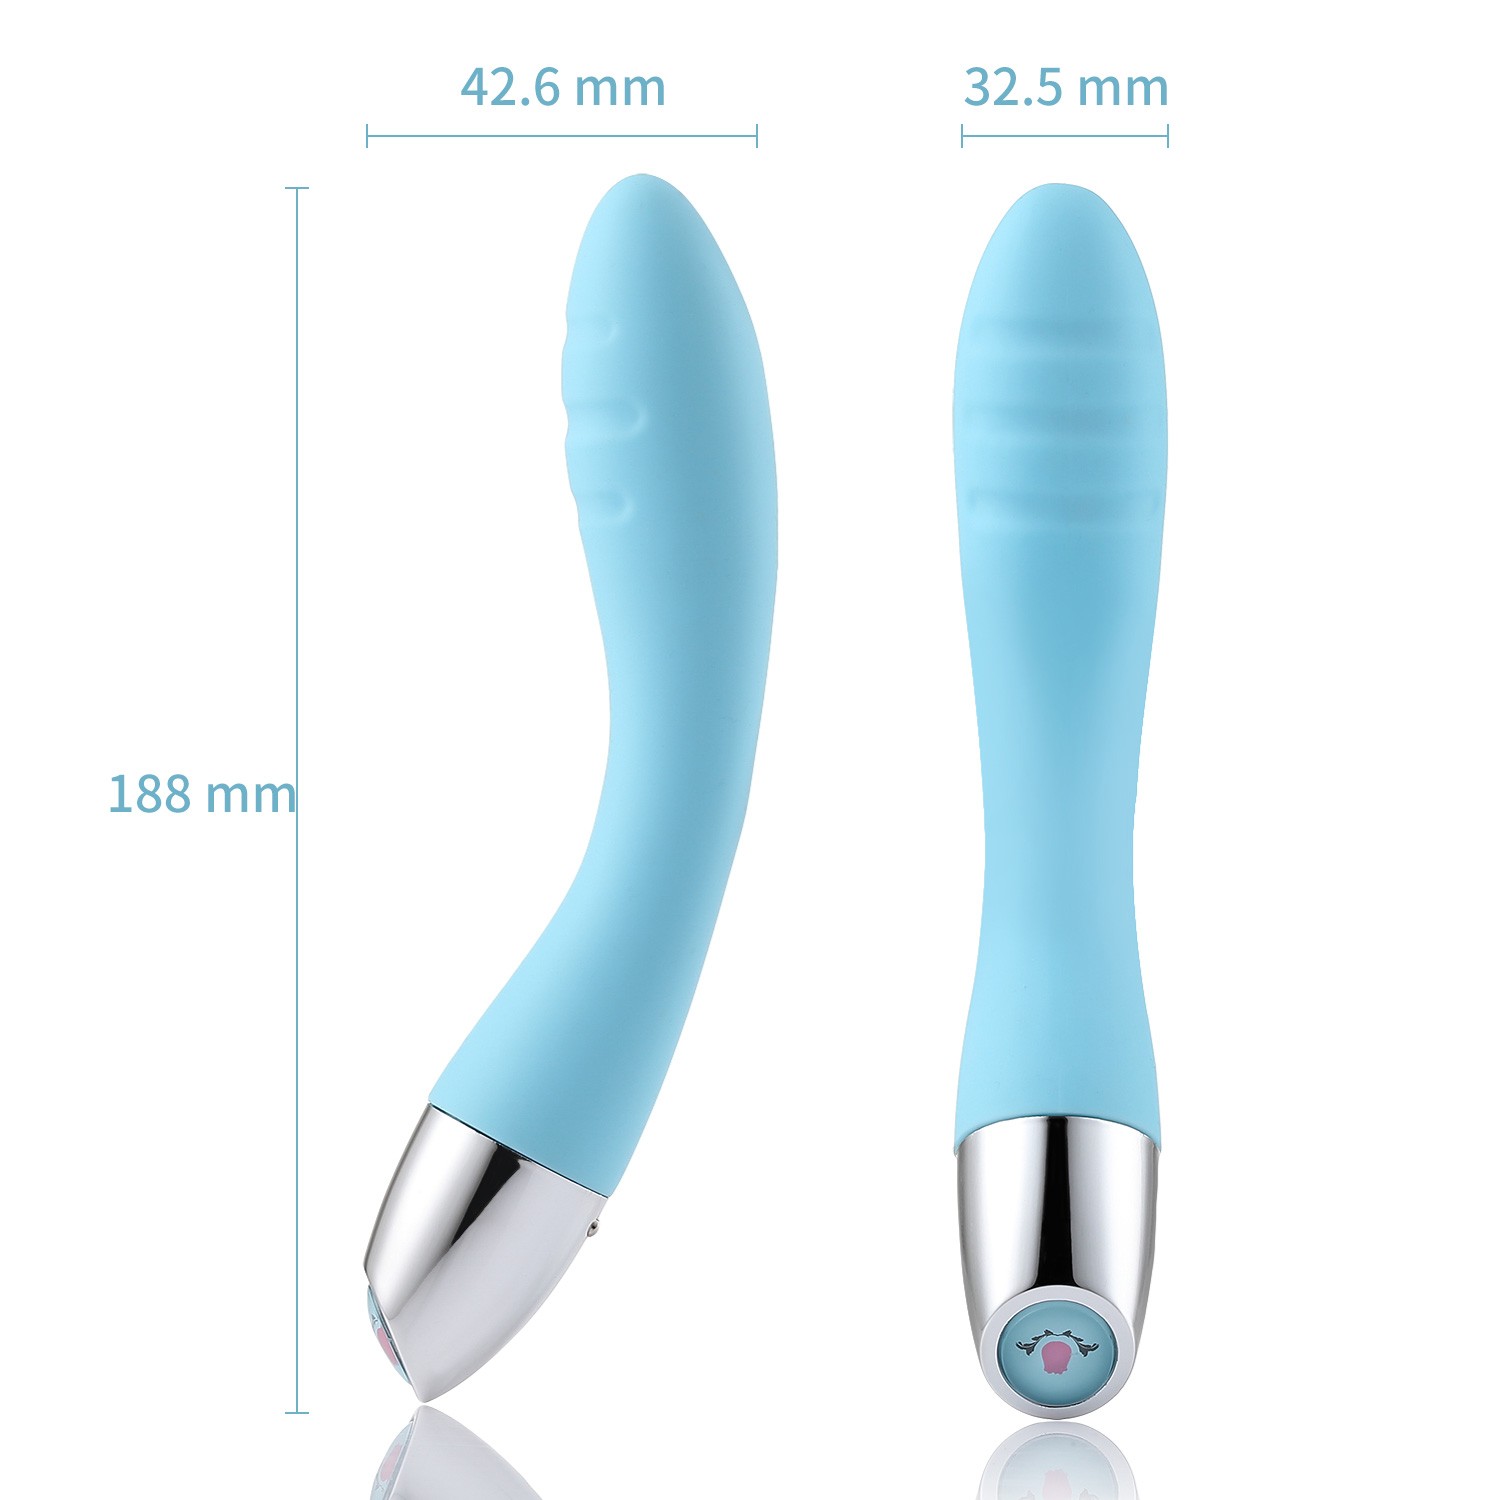 Wowyes Luxeluv V1 Vibrator Size